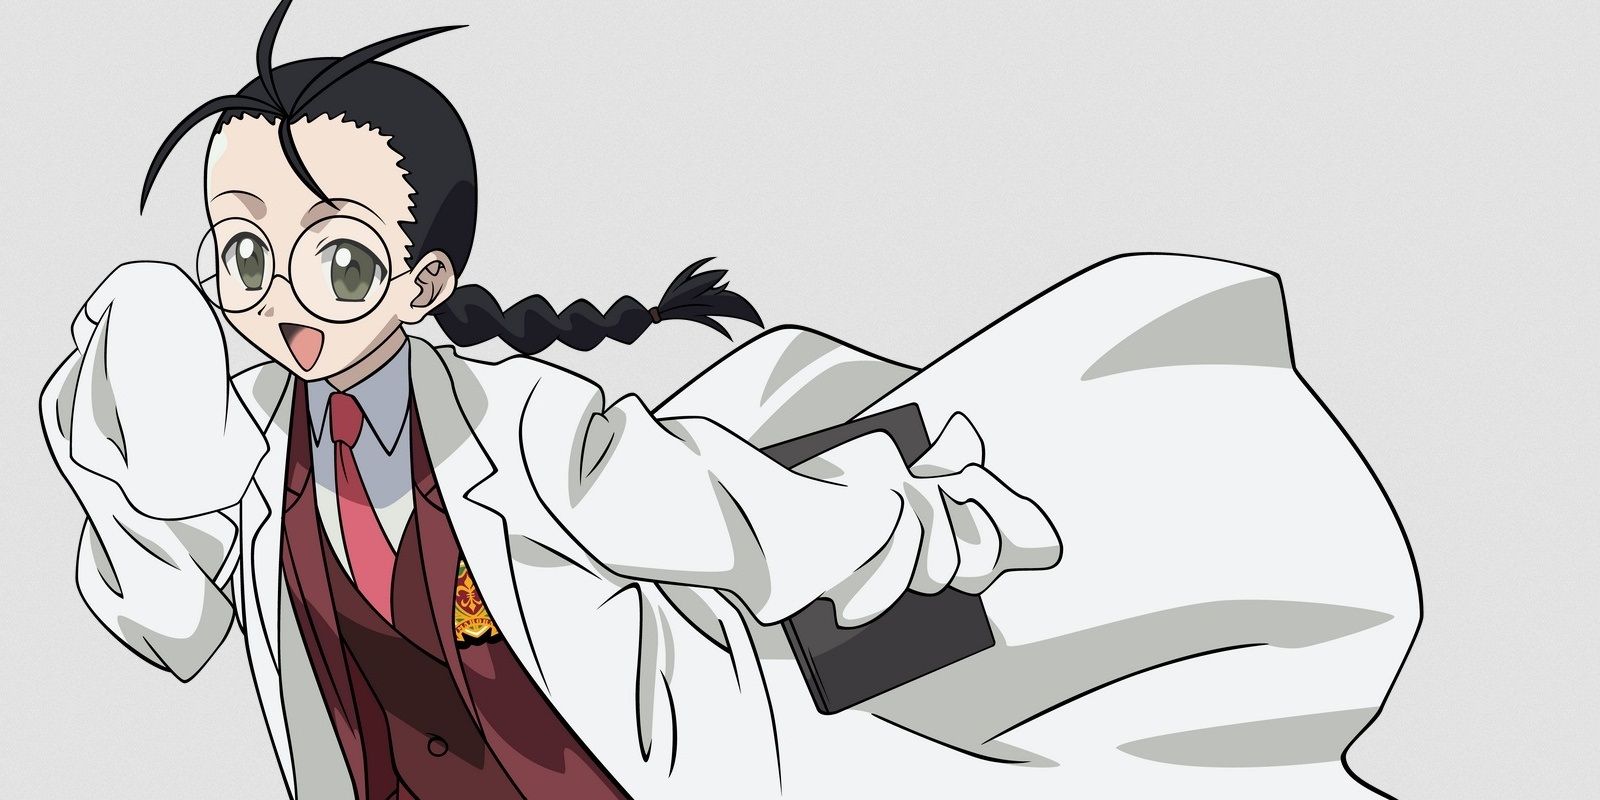 12 most exceptional child prodigies in Naruto, ranked